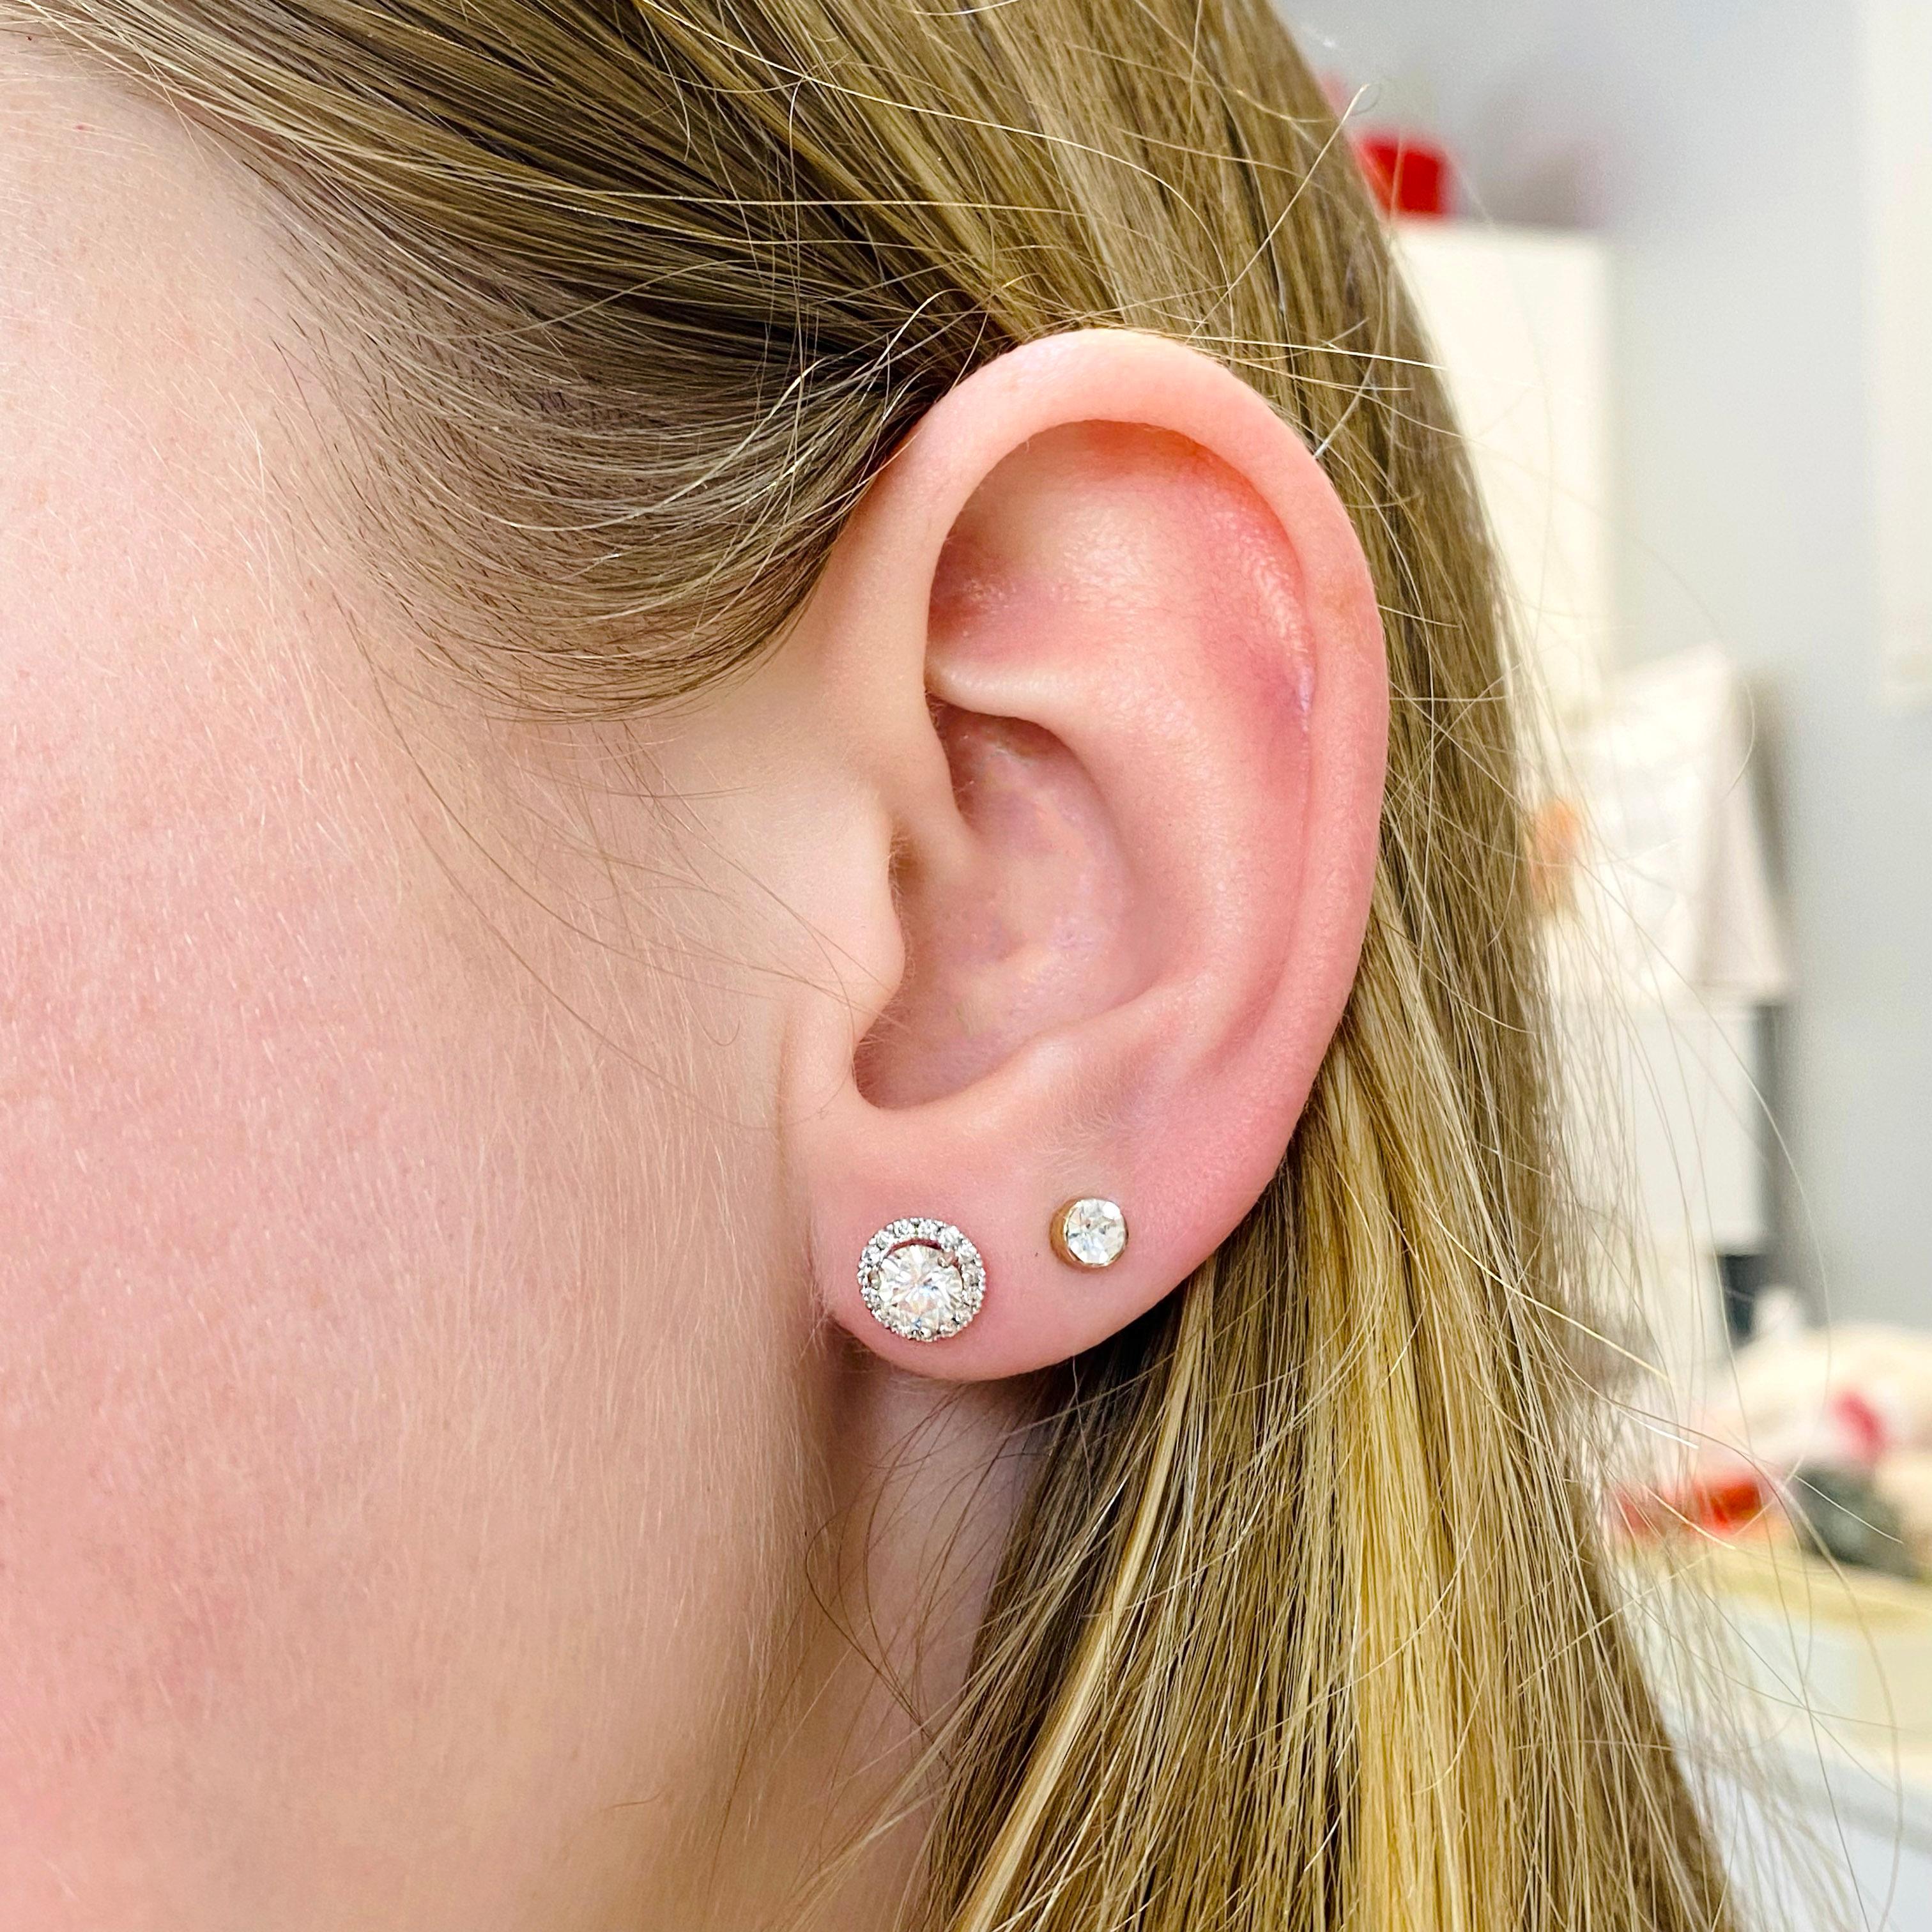 These classic diamond studs have a diamond halo that makes them appear even bigger and more stunning. These are the necessary piece for every jewelry collection. Every woman wants a pair of diamond earrings! The details for these gorgeous earrings